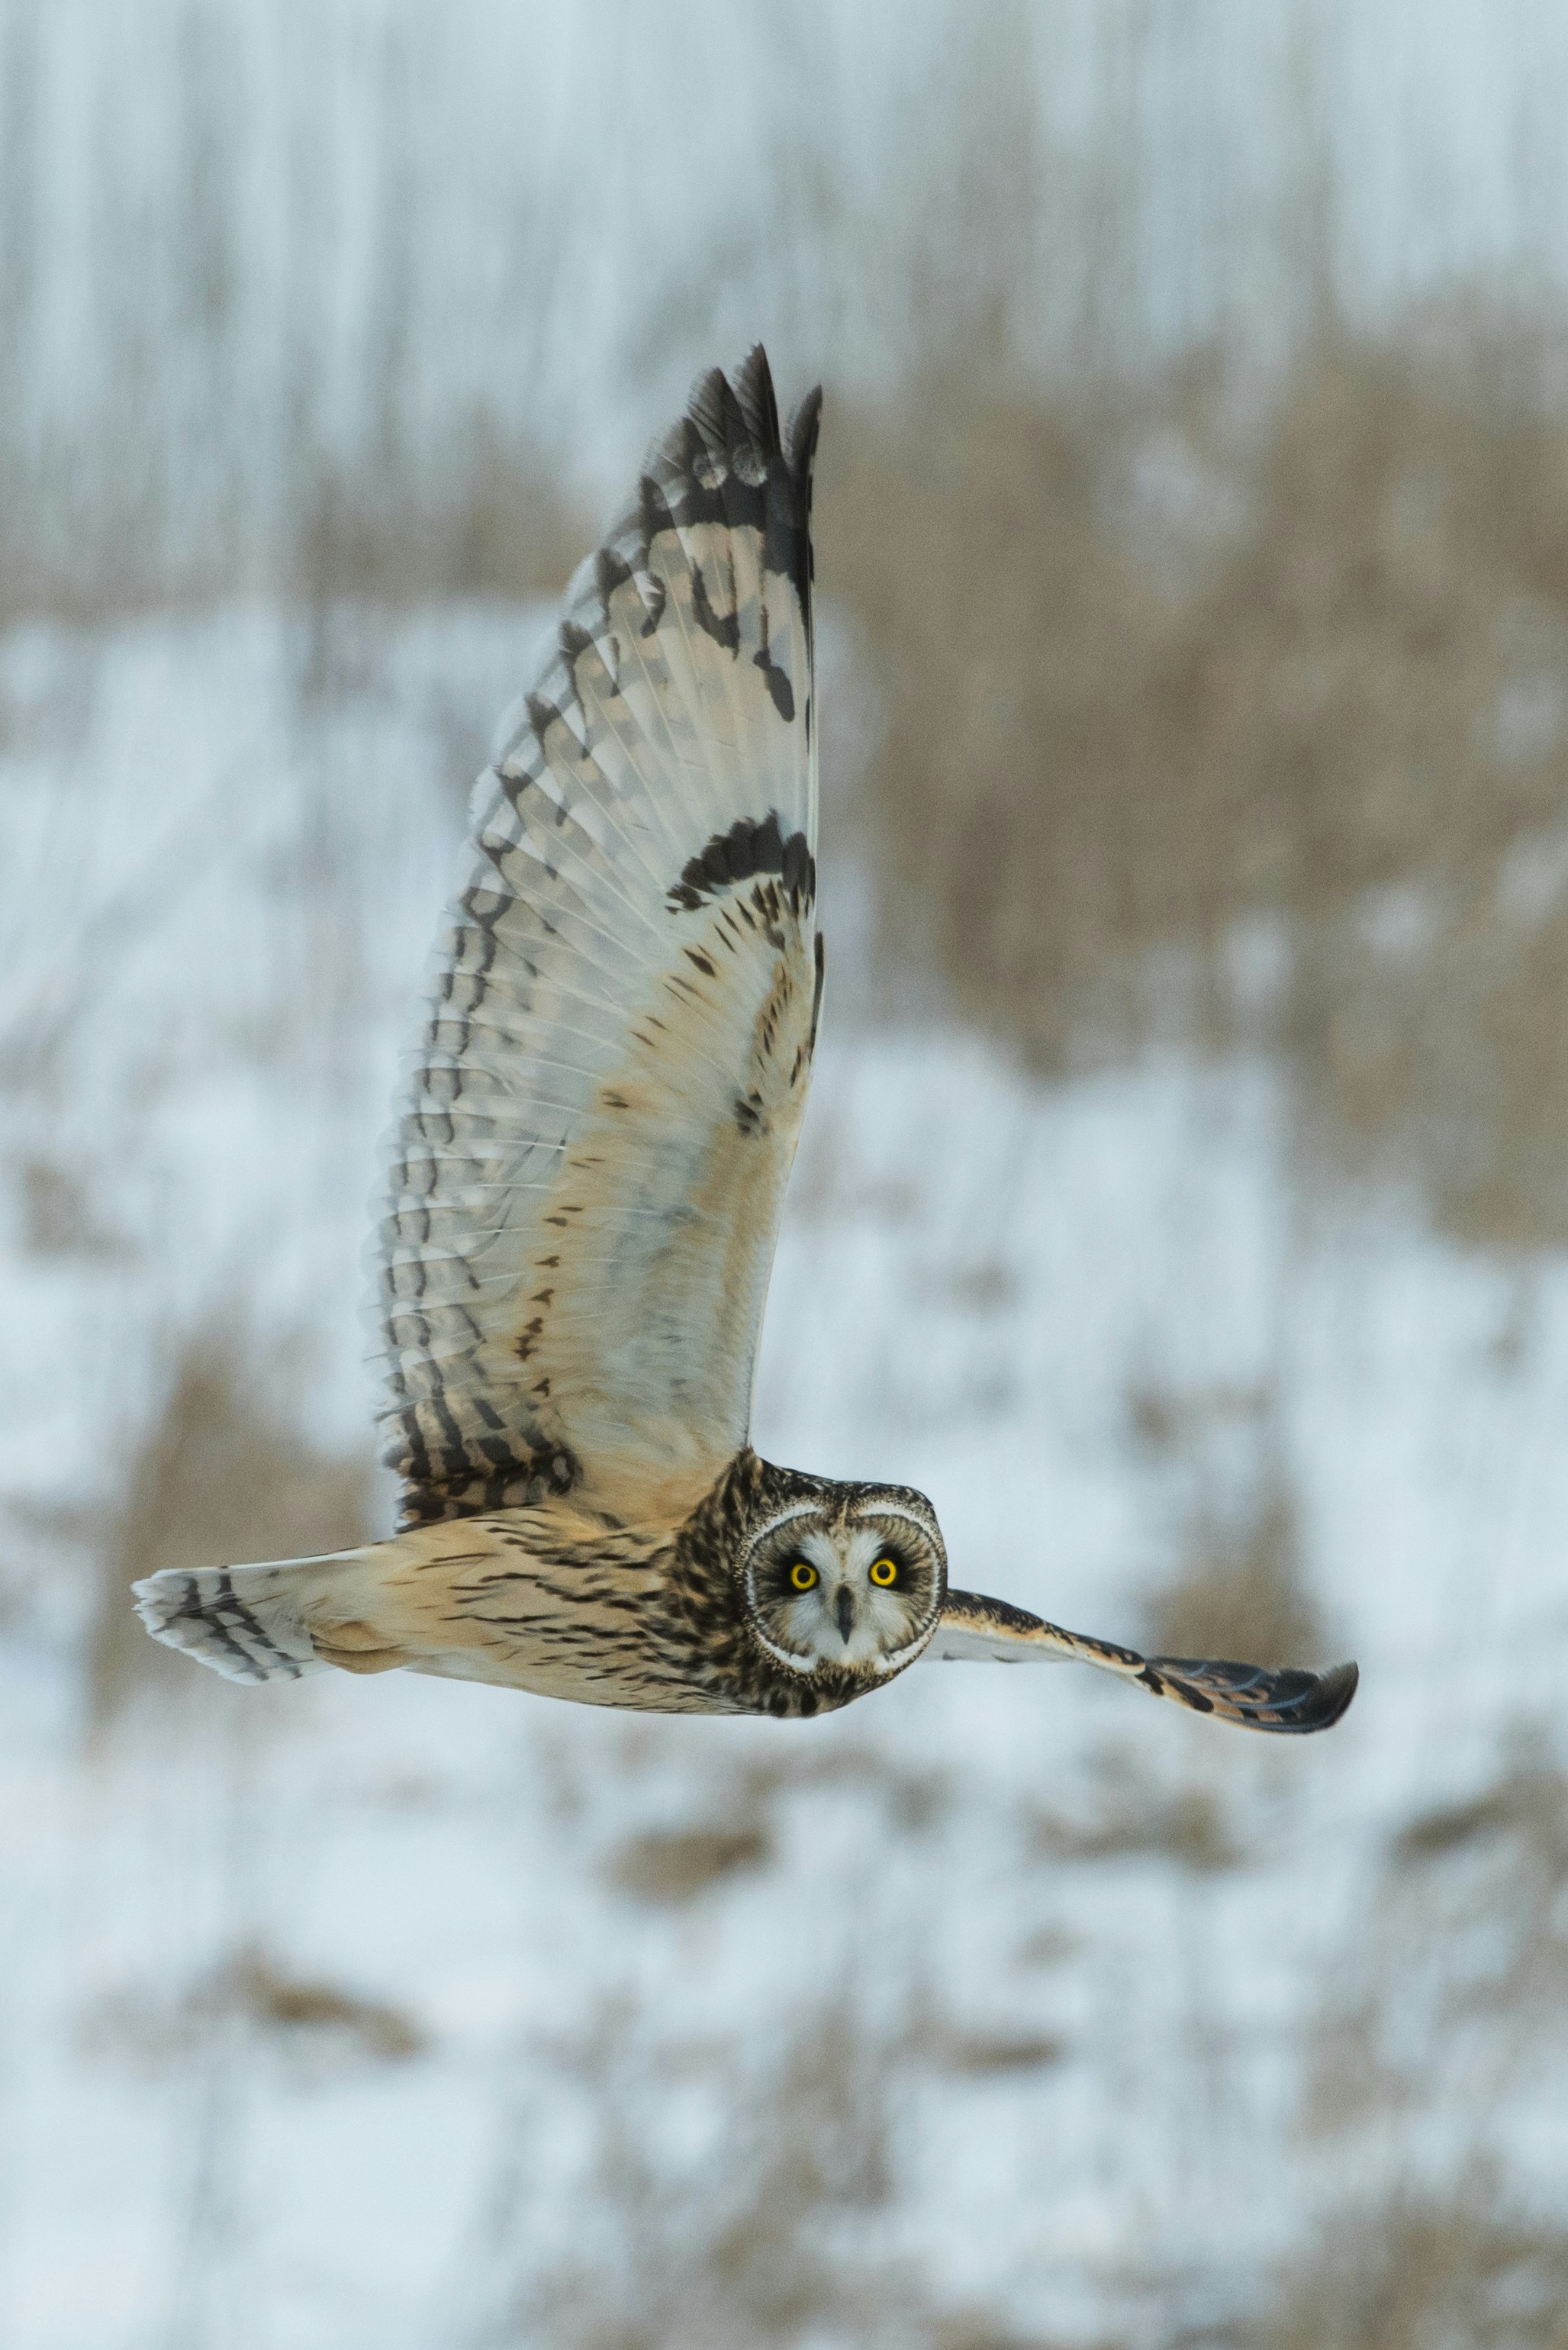 An  exceptional day for photographing owls in the wild! After days of snow and cold, the owls were very active and obviously hungry, taking to the air in the afternoon (generally they take to the air around dusk).  In the area there were about twenty owls , with as many as ten visible at one time.